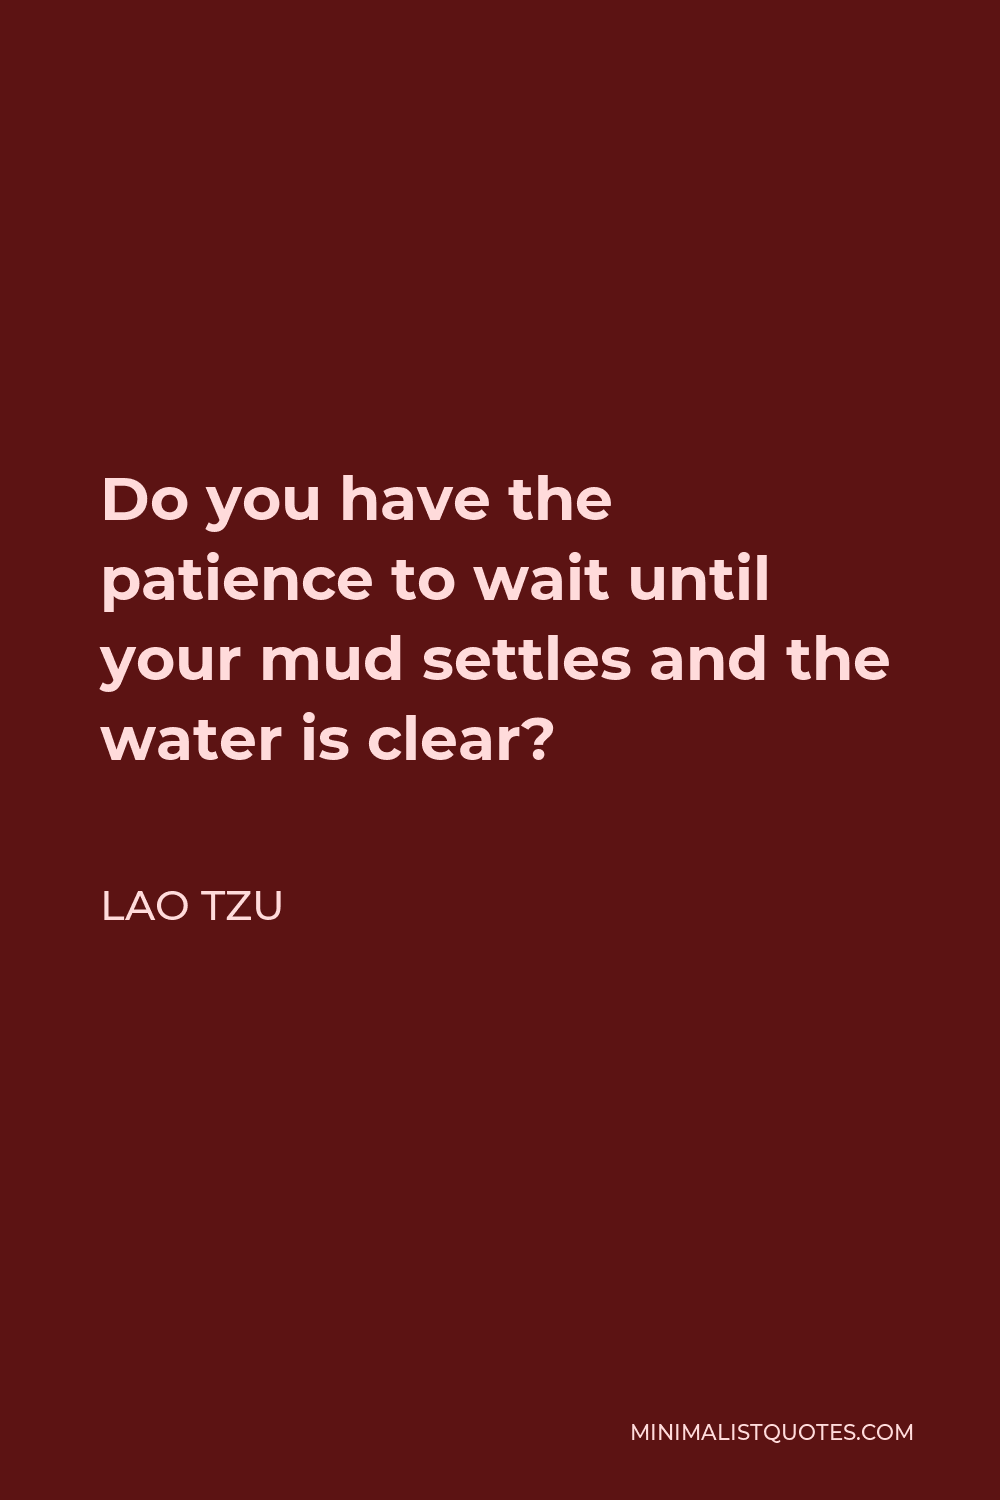 Lao Tzu Quote - Do you have the patience to wait until your mud settles and the water is clear?